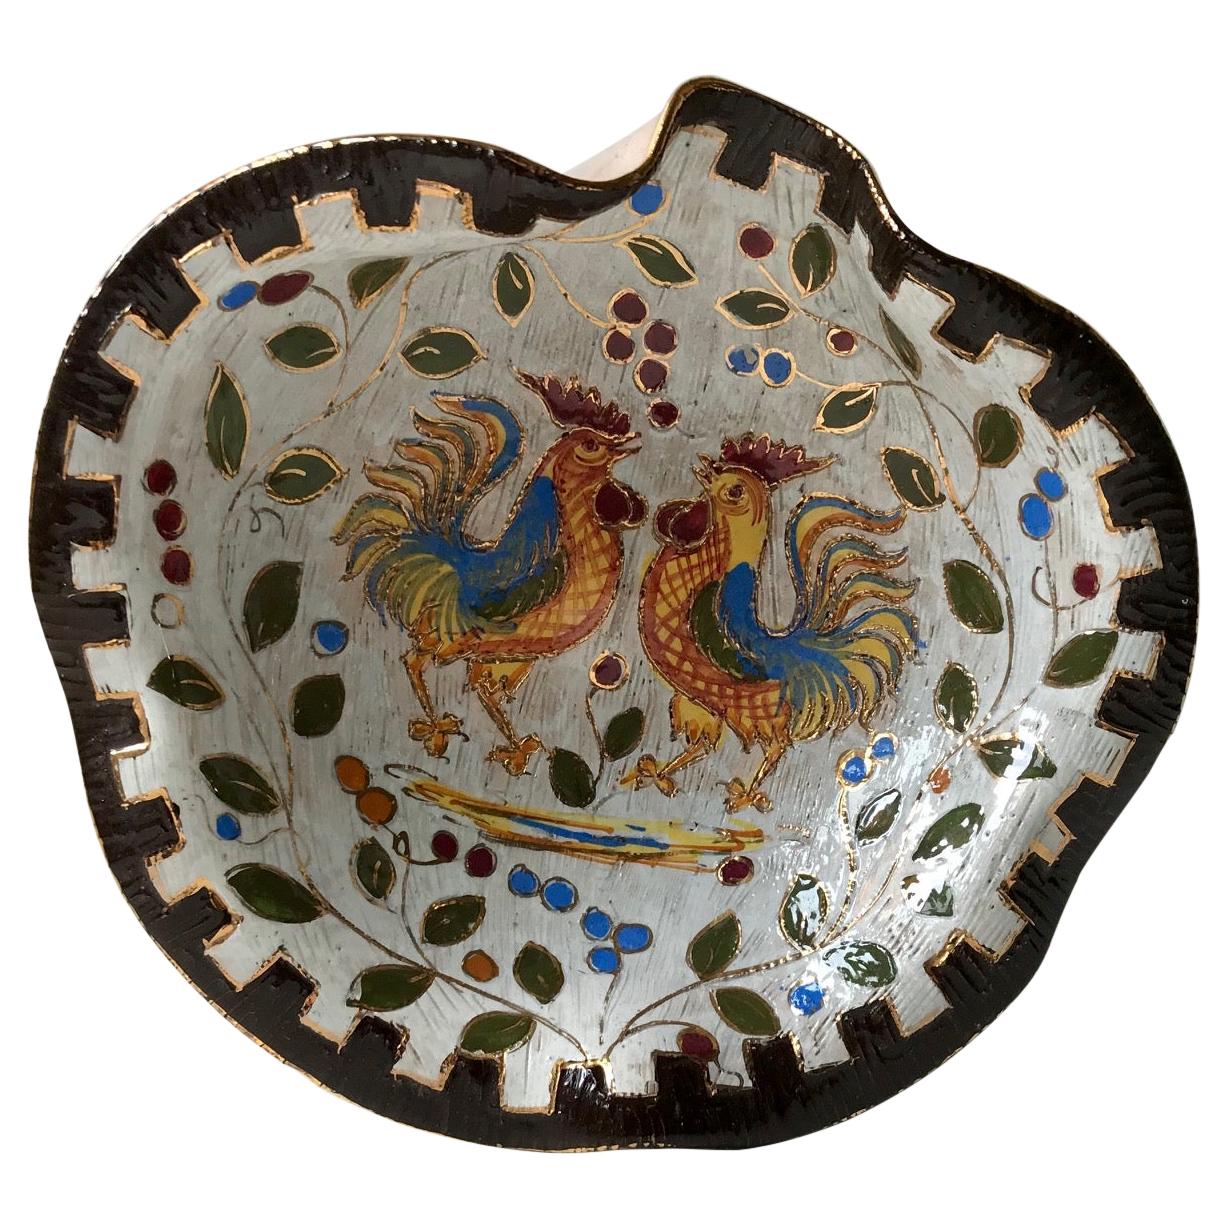 Italian Ceramic Rooster Dish with Sgraffito Glaze by Bitossi, 1960s